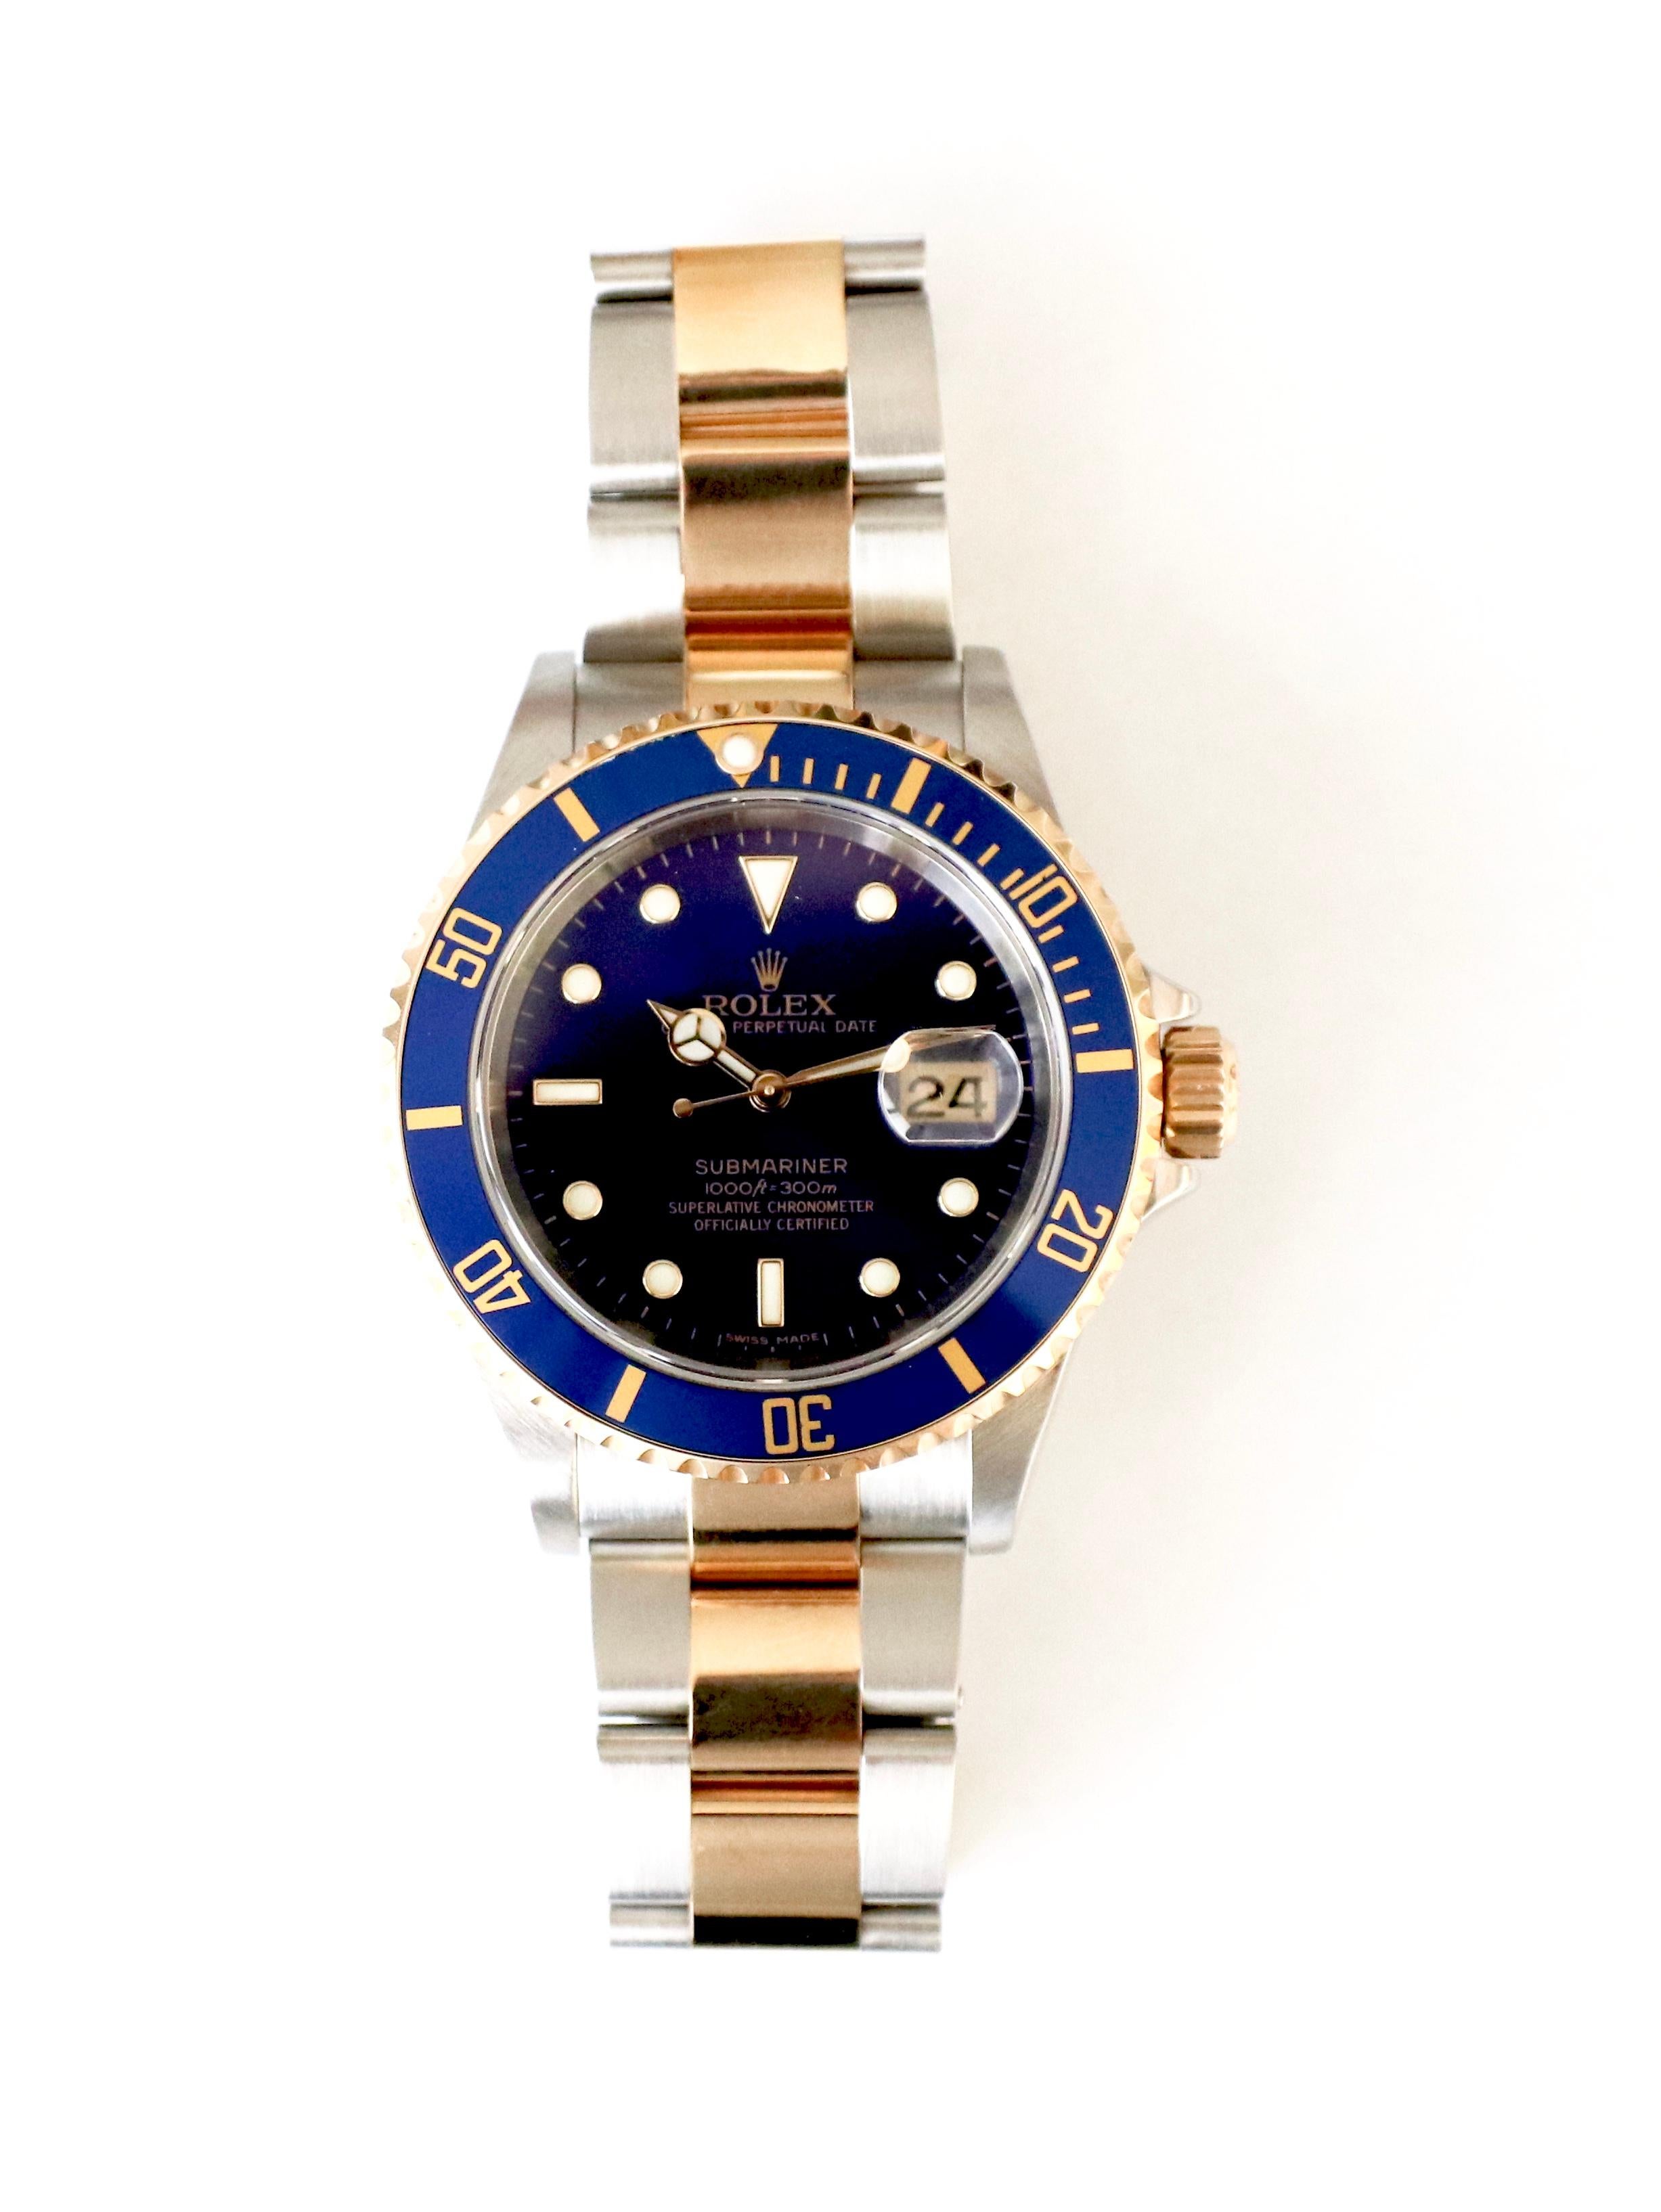 Rolex Submariner Reference 16613 Two-Tone Gold Stainless Blue Dial/Bezel Watch 2